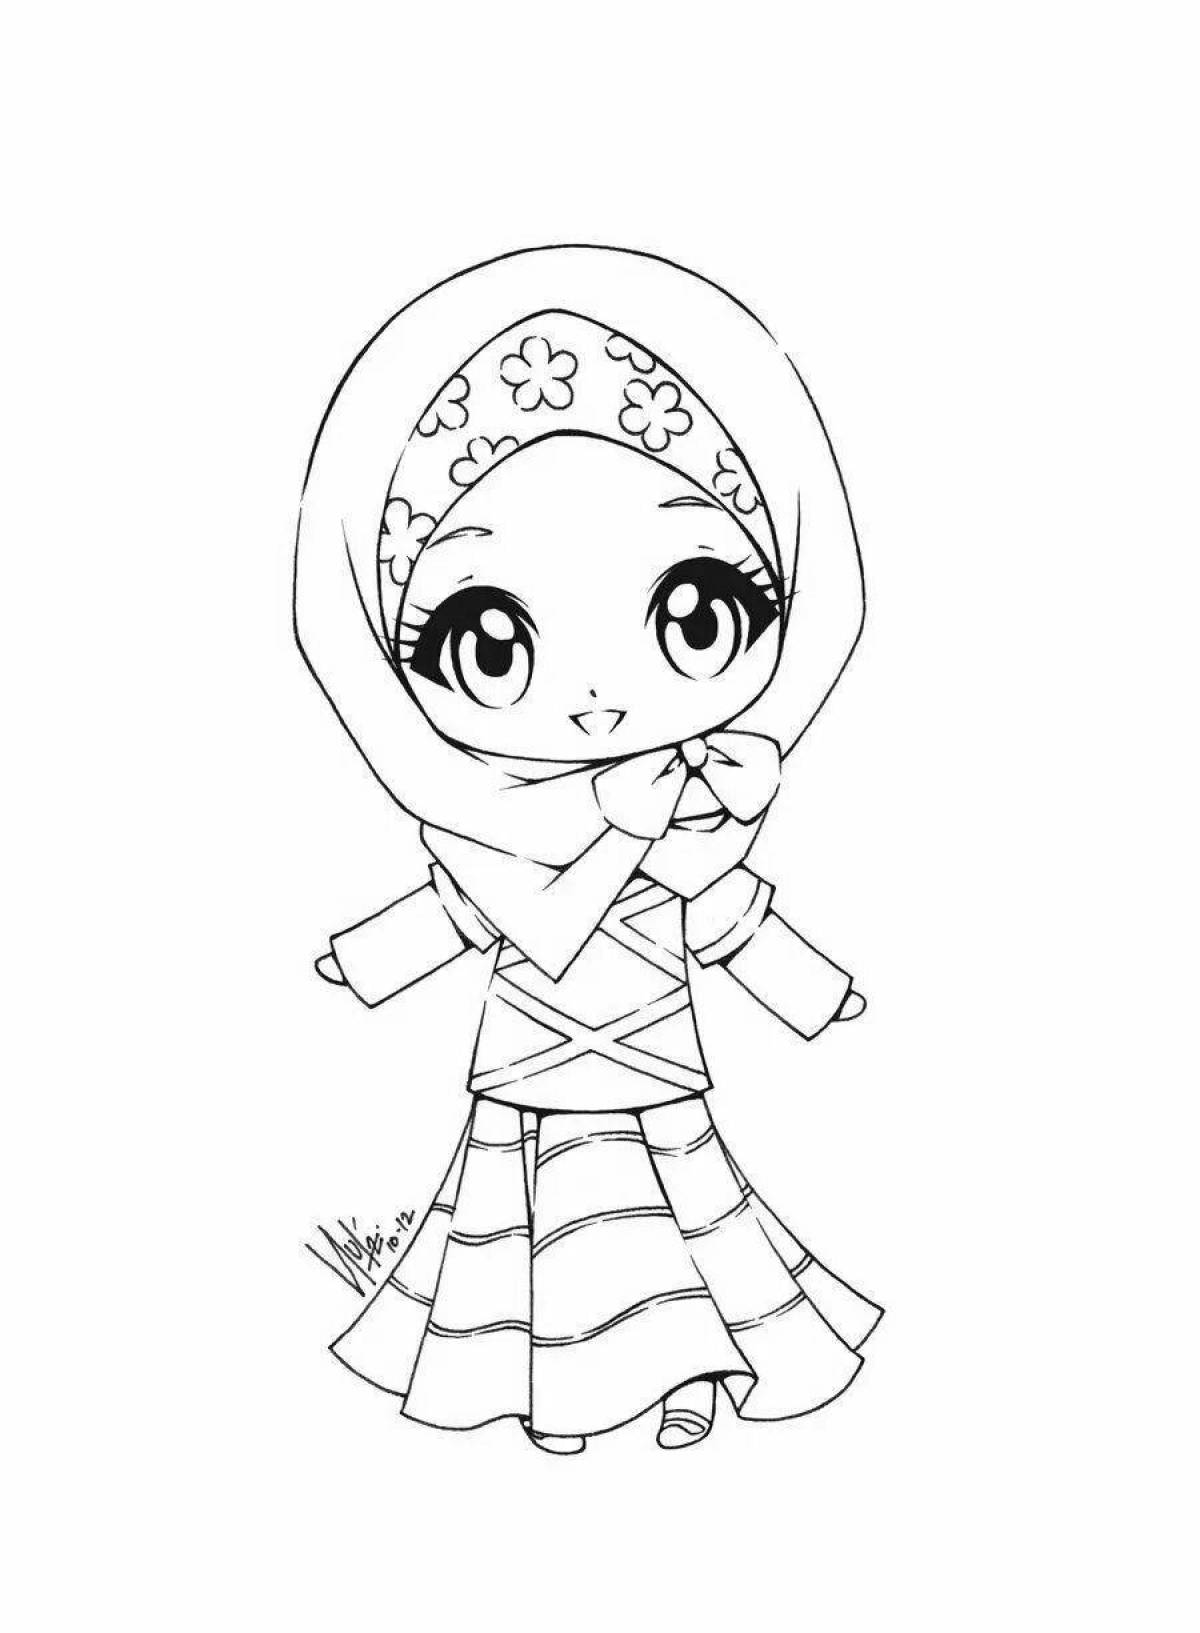 Muslim girls happy coloring pages